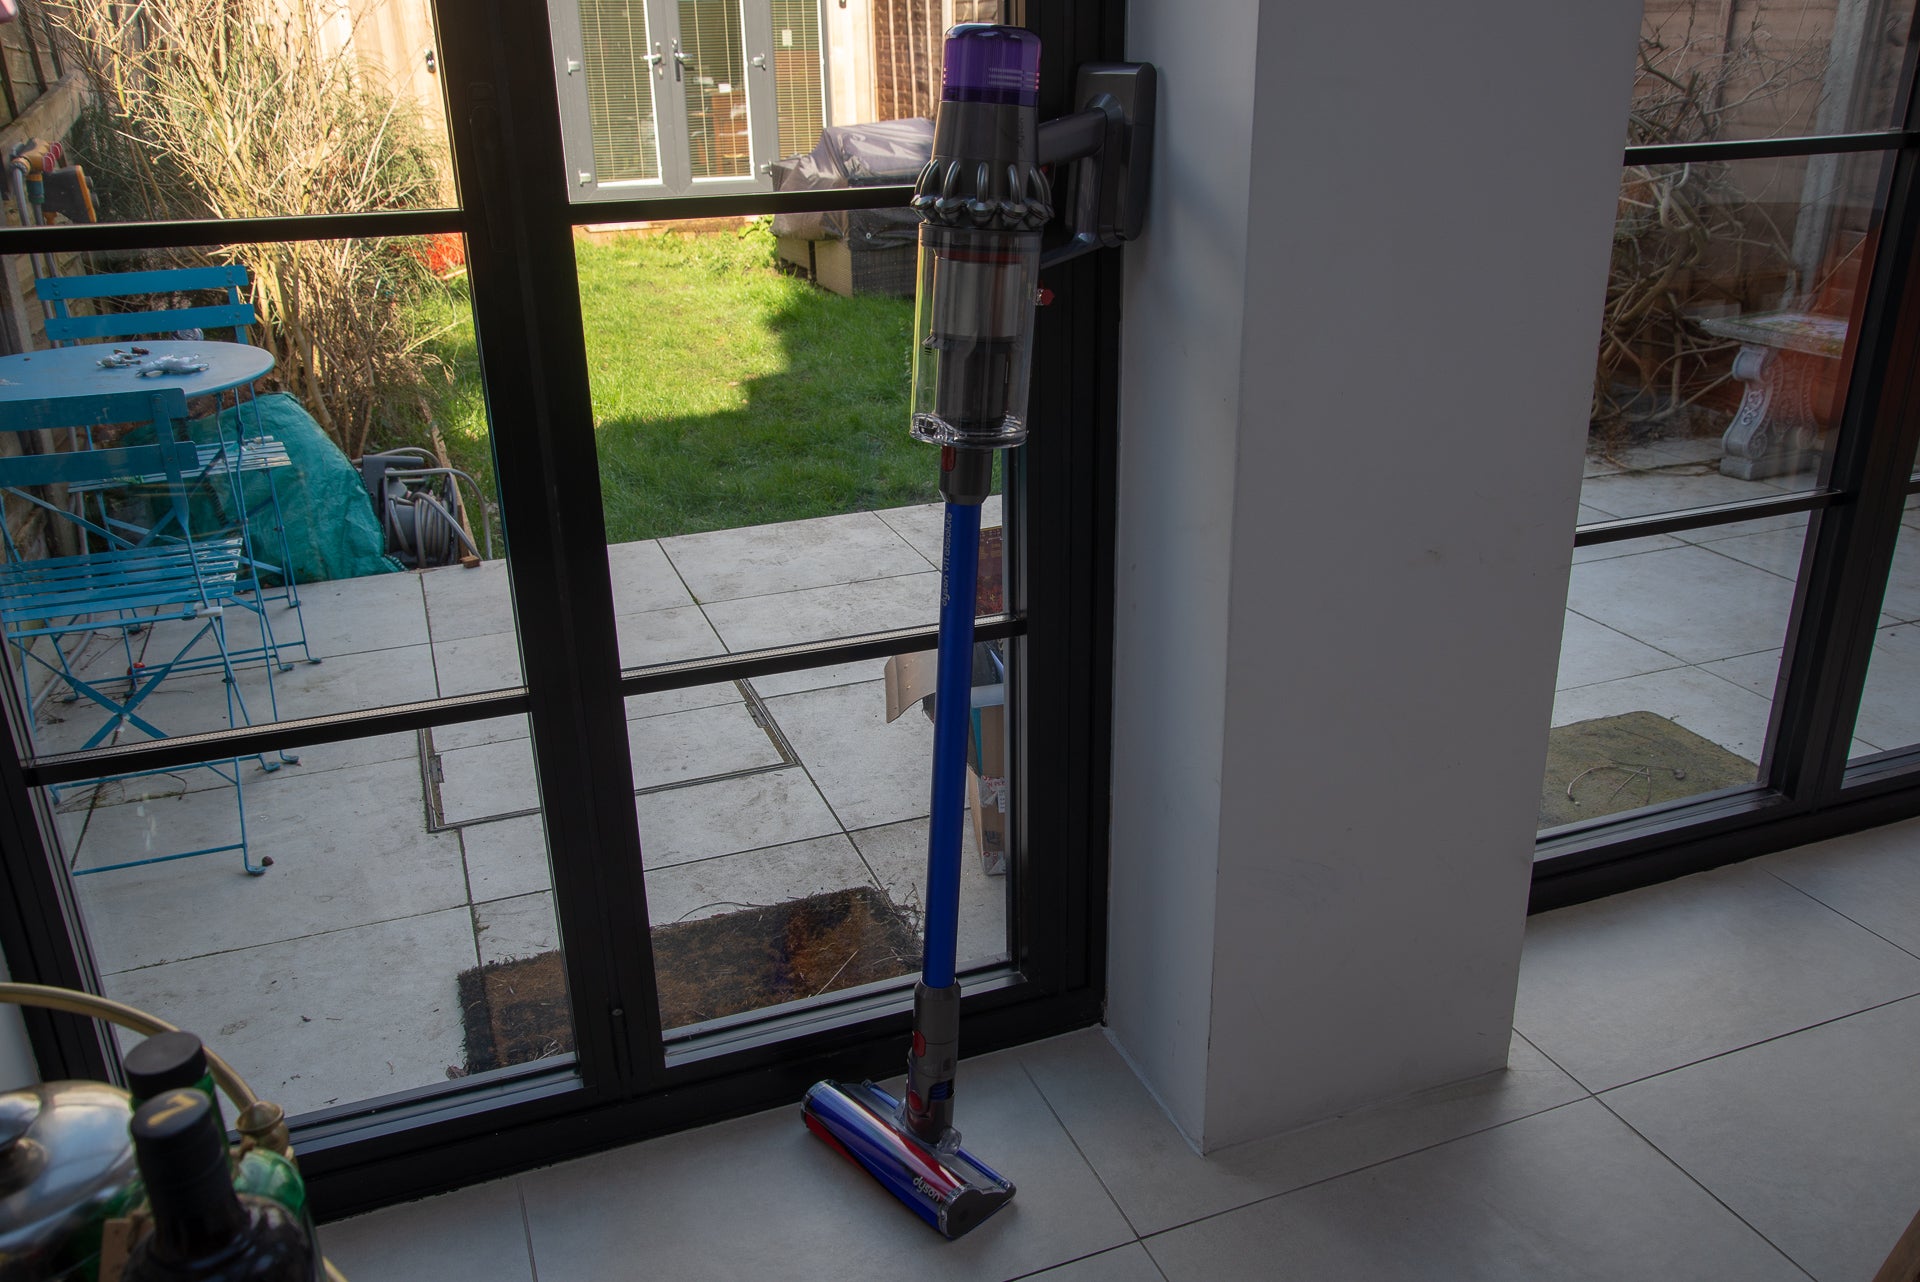 The best cordless vacuum cleaner is the Dyson V11